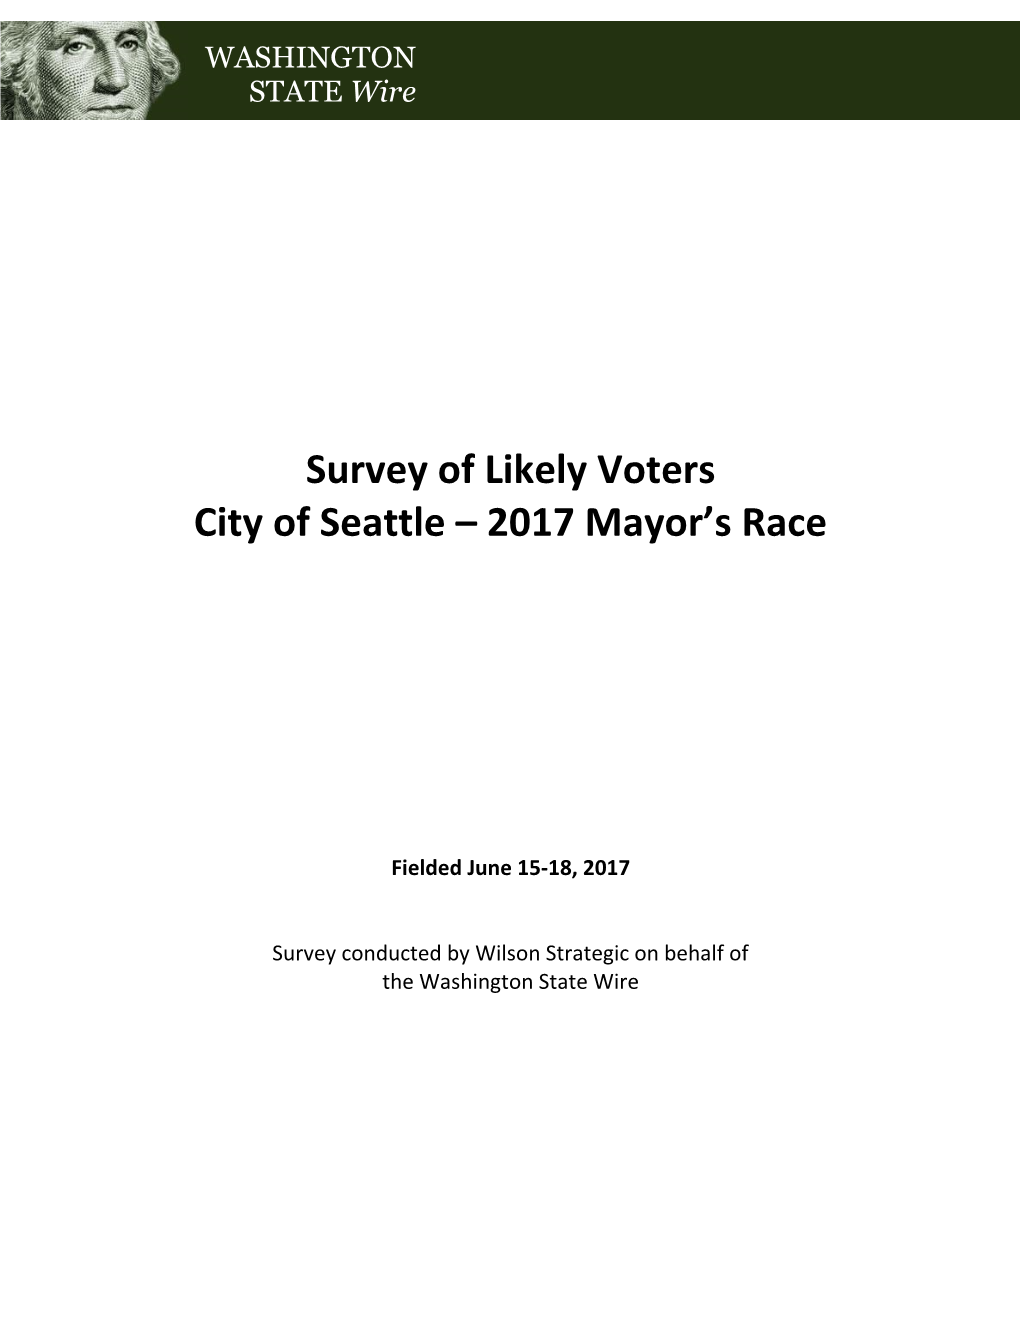 Survey of Likely Voters City of Seattle – 2017 Mayor's Race